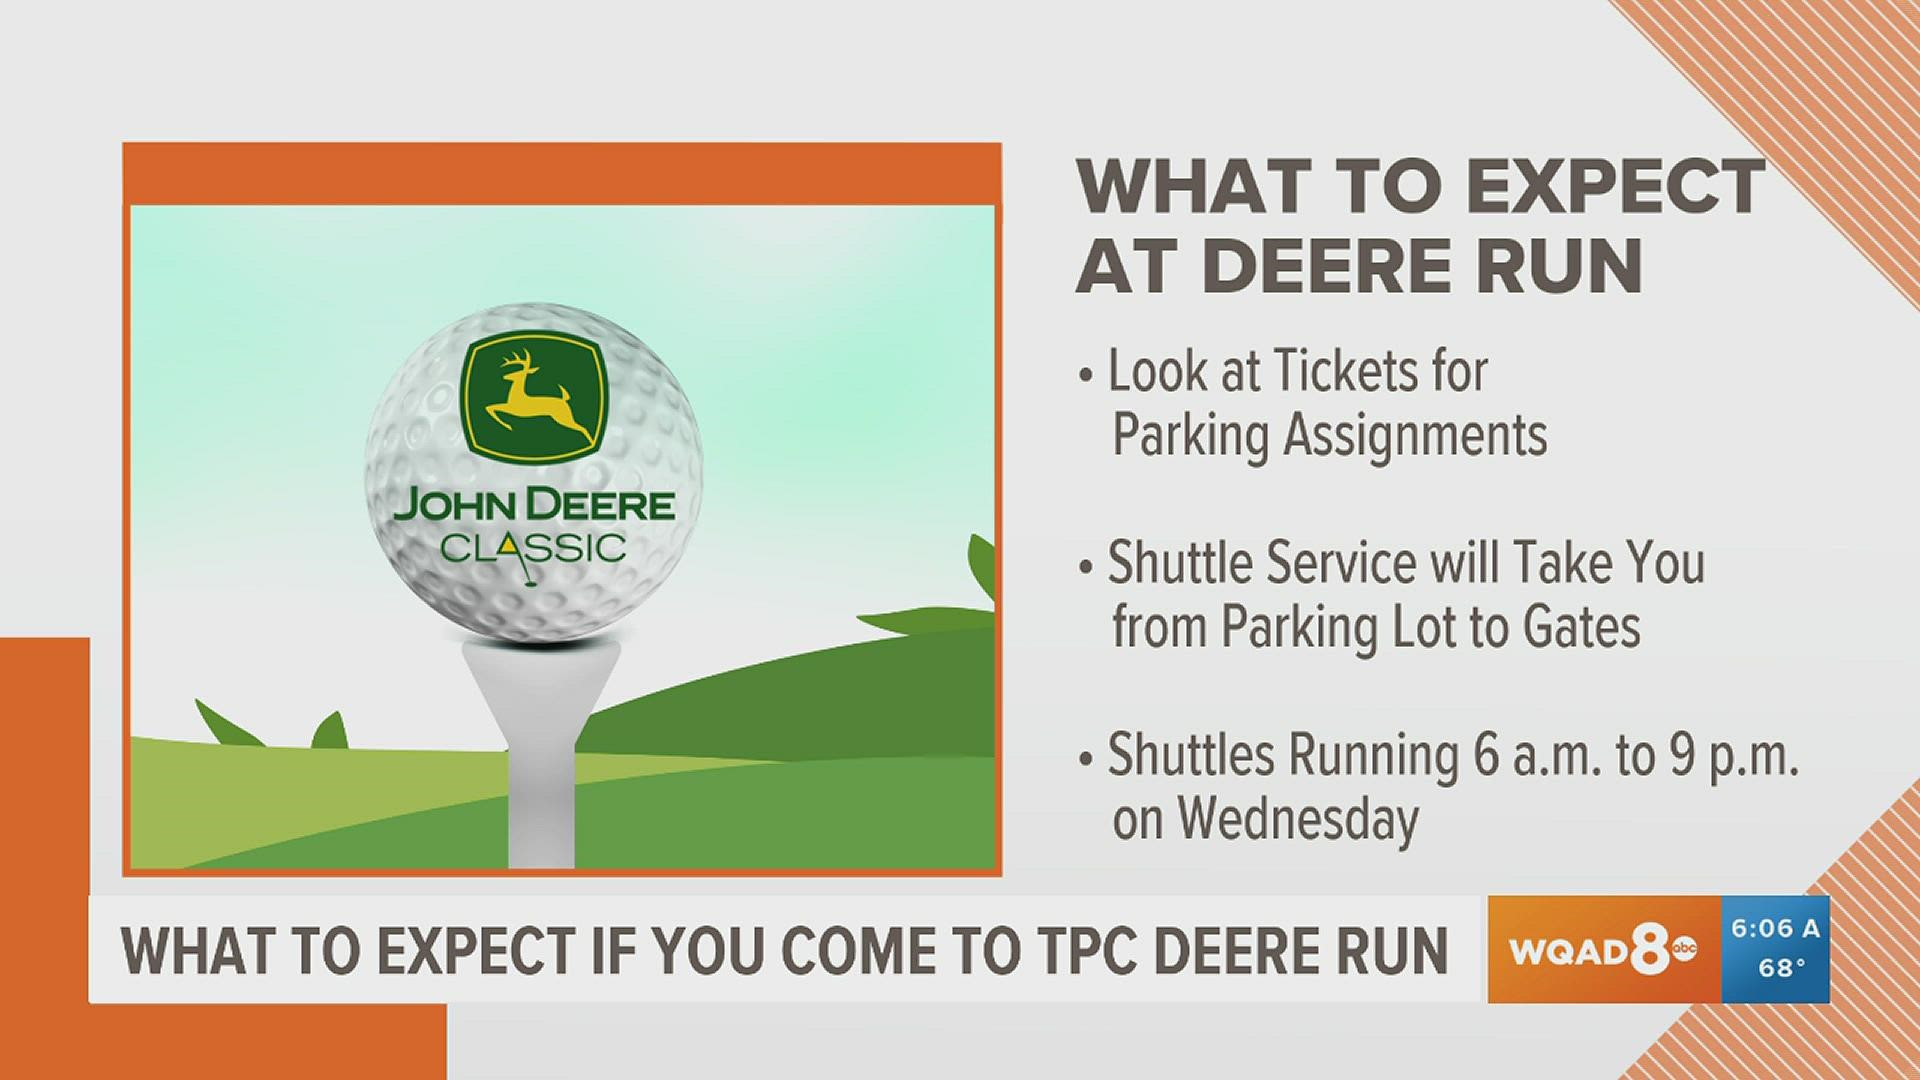 Wednesday marks Day 1 of the John Deere Classic golf tournament. Here's what you should expect if you plan to attend.